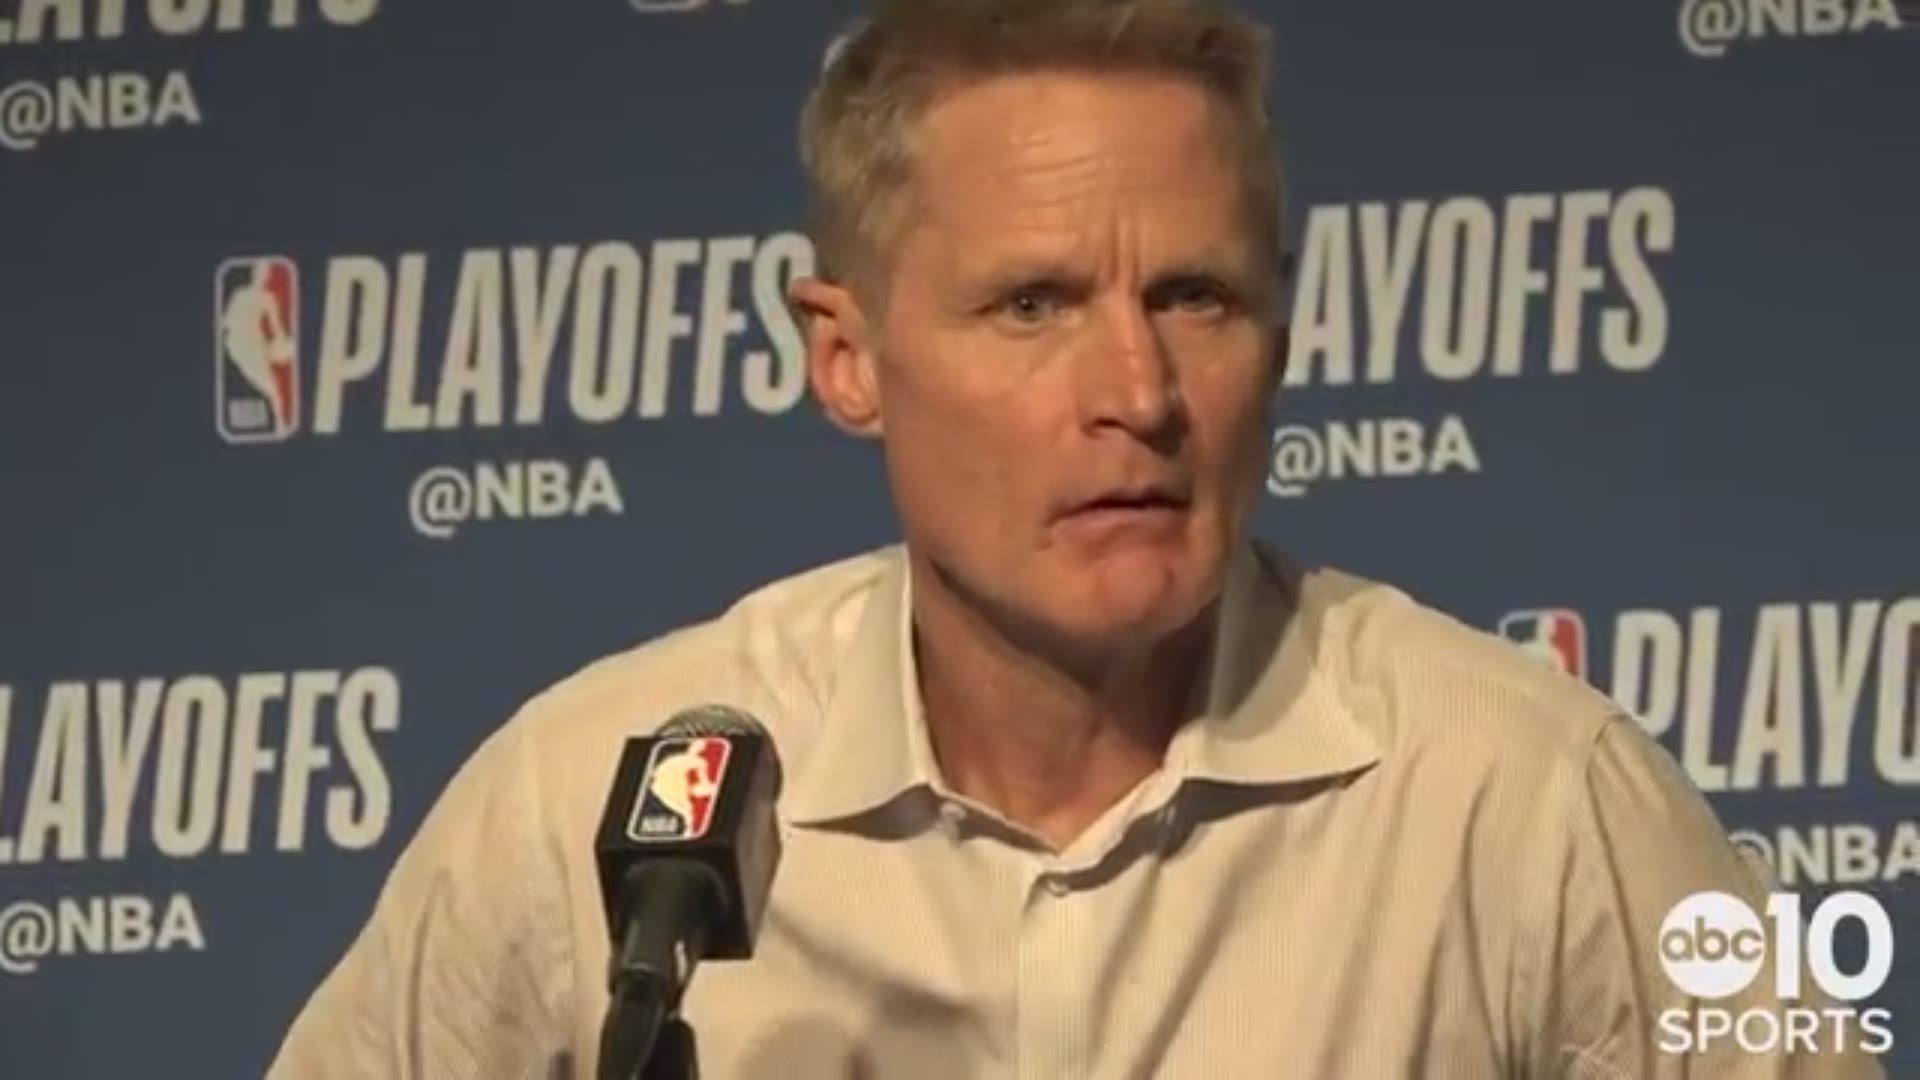 Warriors head coach Steve Kerr says his team "wasn't right from the very beginning" in Wednesday's Game 5 loss at Oracle Arena to the Los Angeles Clippers.